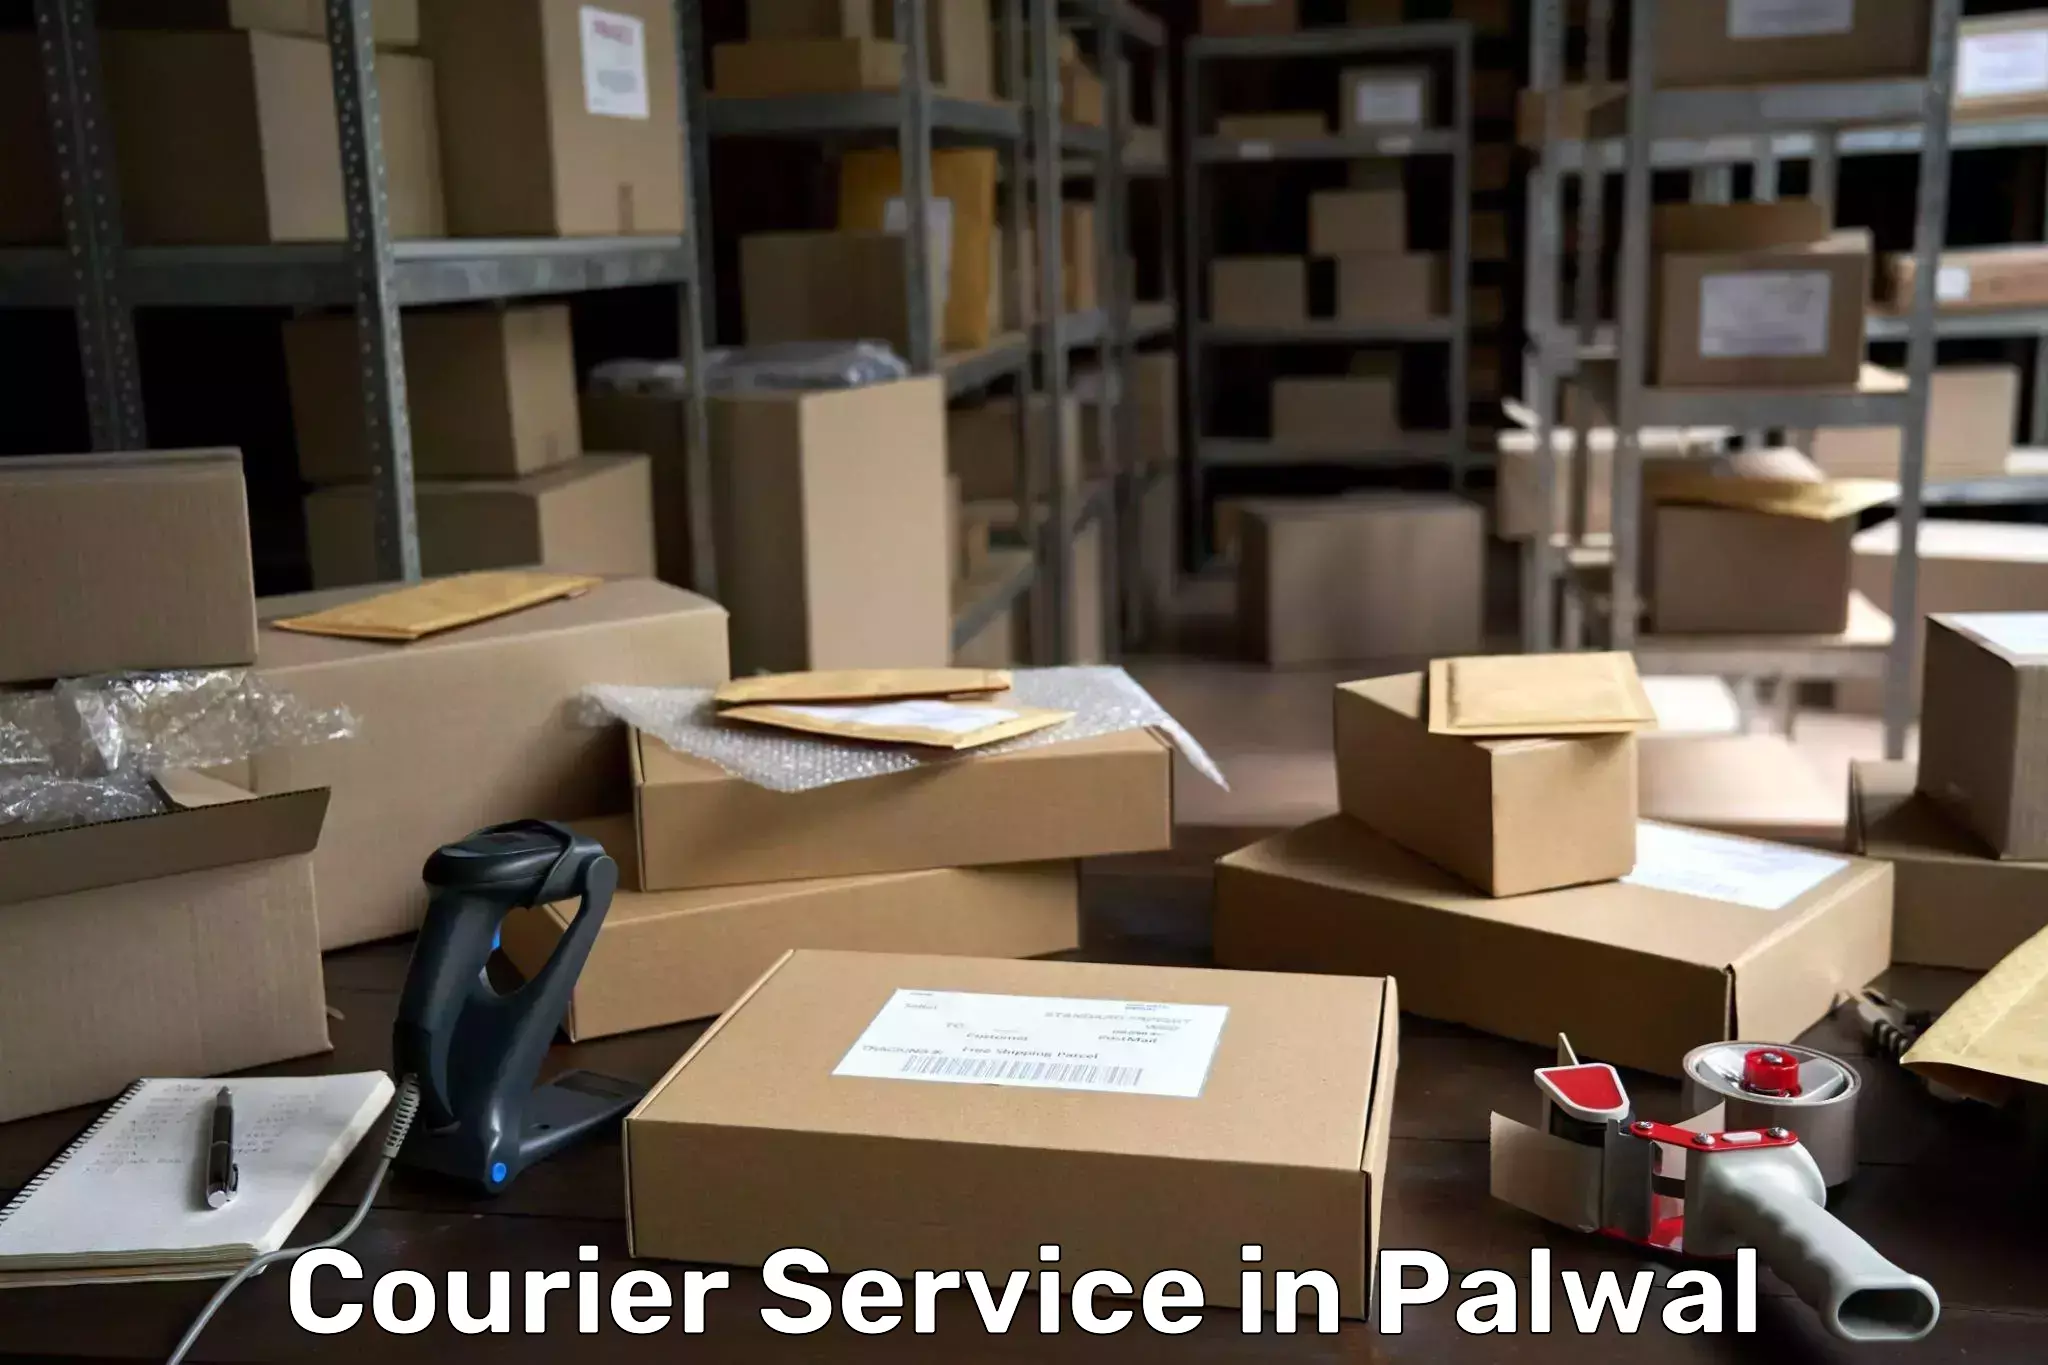 Courier service efficiency in Palwal